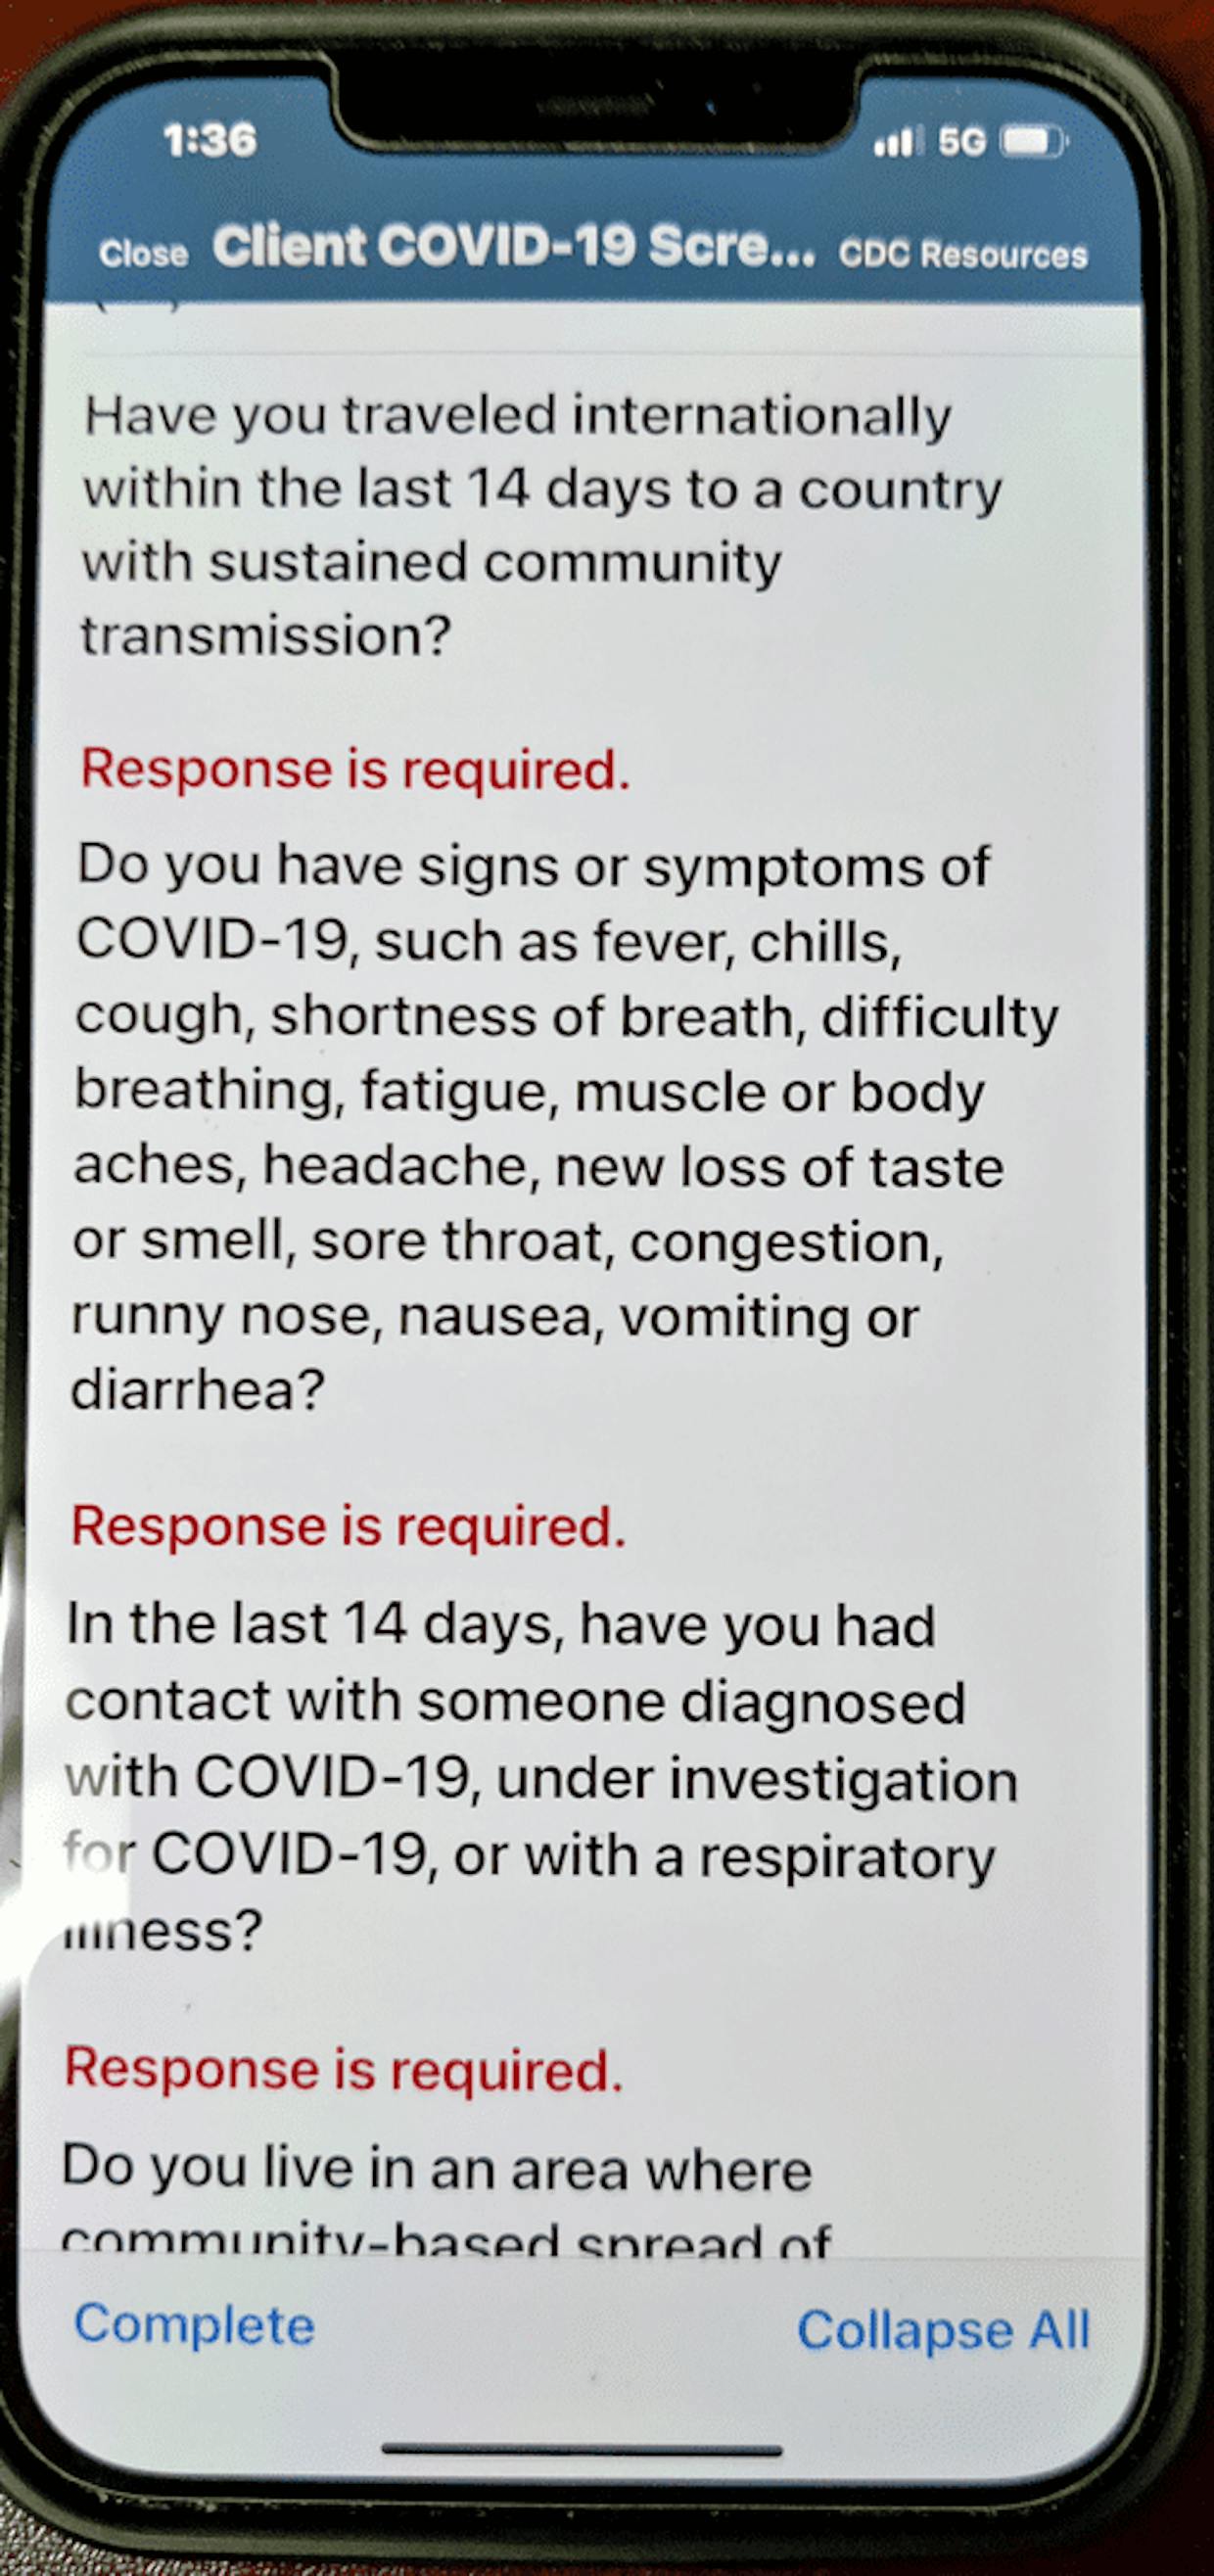 Another iOS device can't complete COVID-19 screening